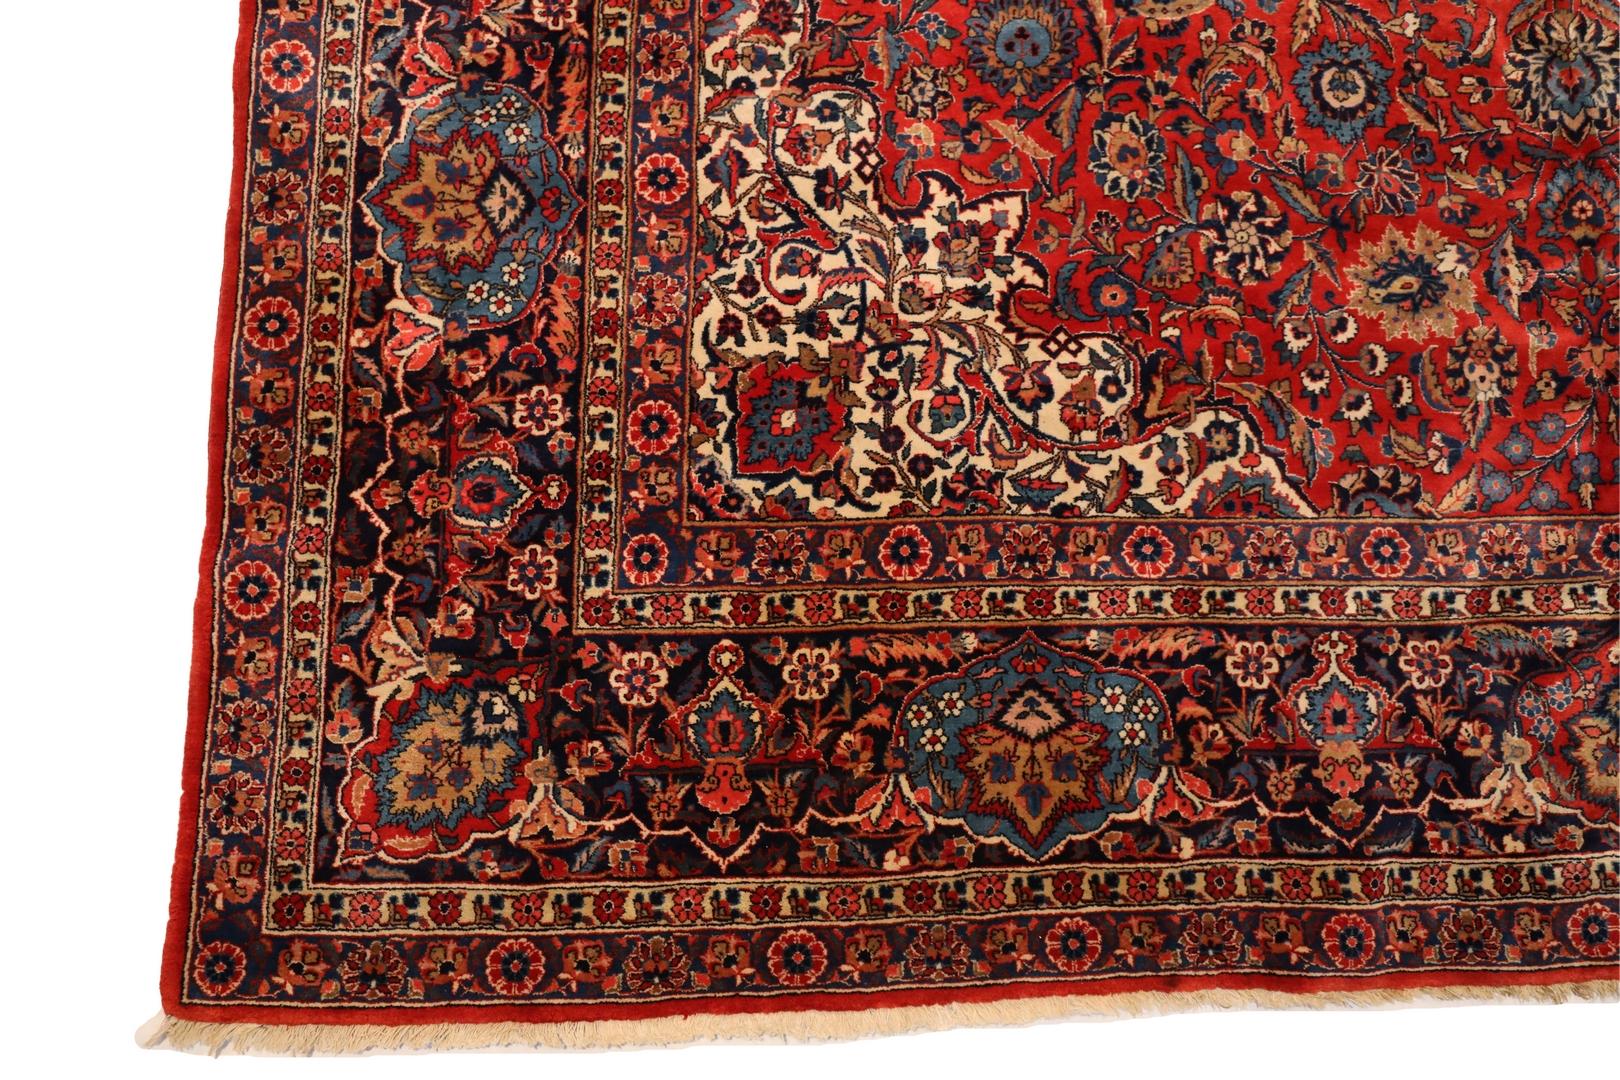 Indulge your senses in the luxurious embrace of a Kashan room-size rug, a true masterpiece that invites you to uncover its mesmerizing intricacies. This opulent textile treasure unfolds before your eyes, revealing a harmonious interplay of vivid